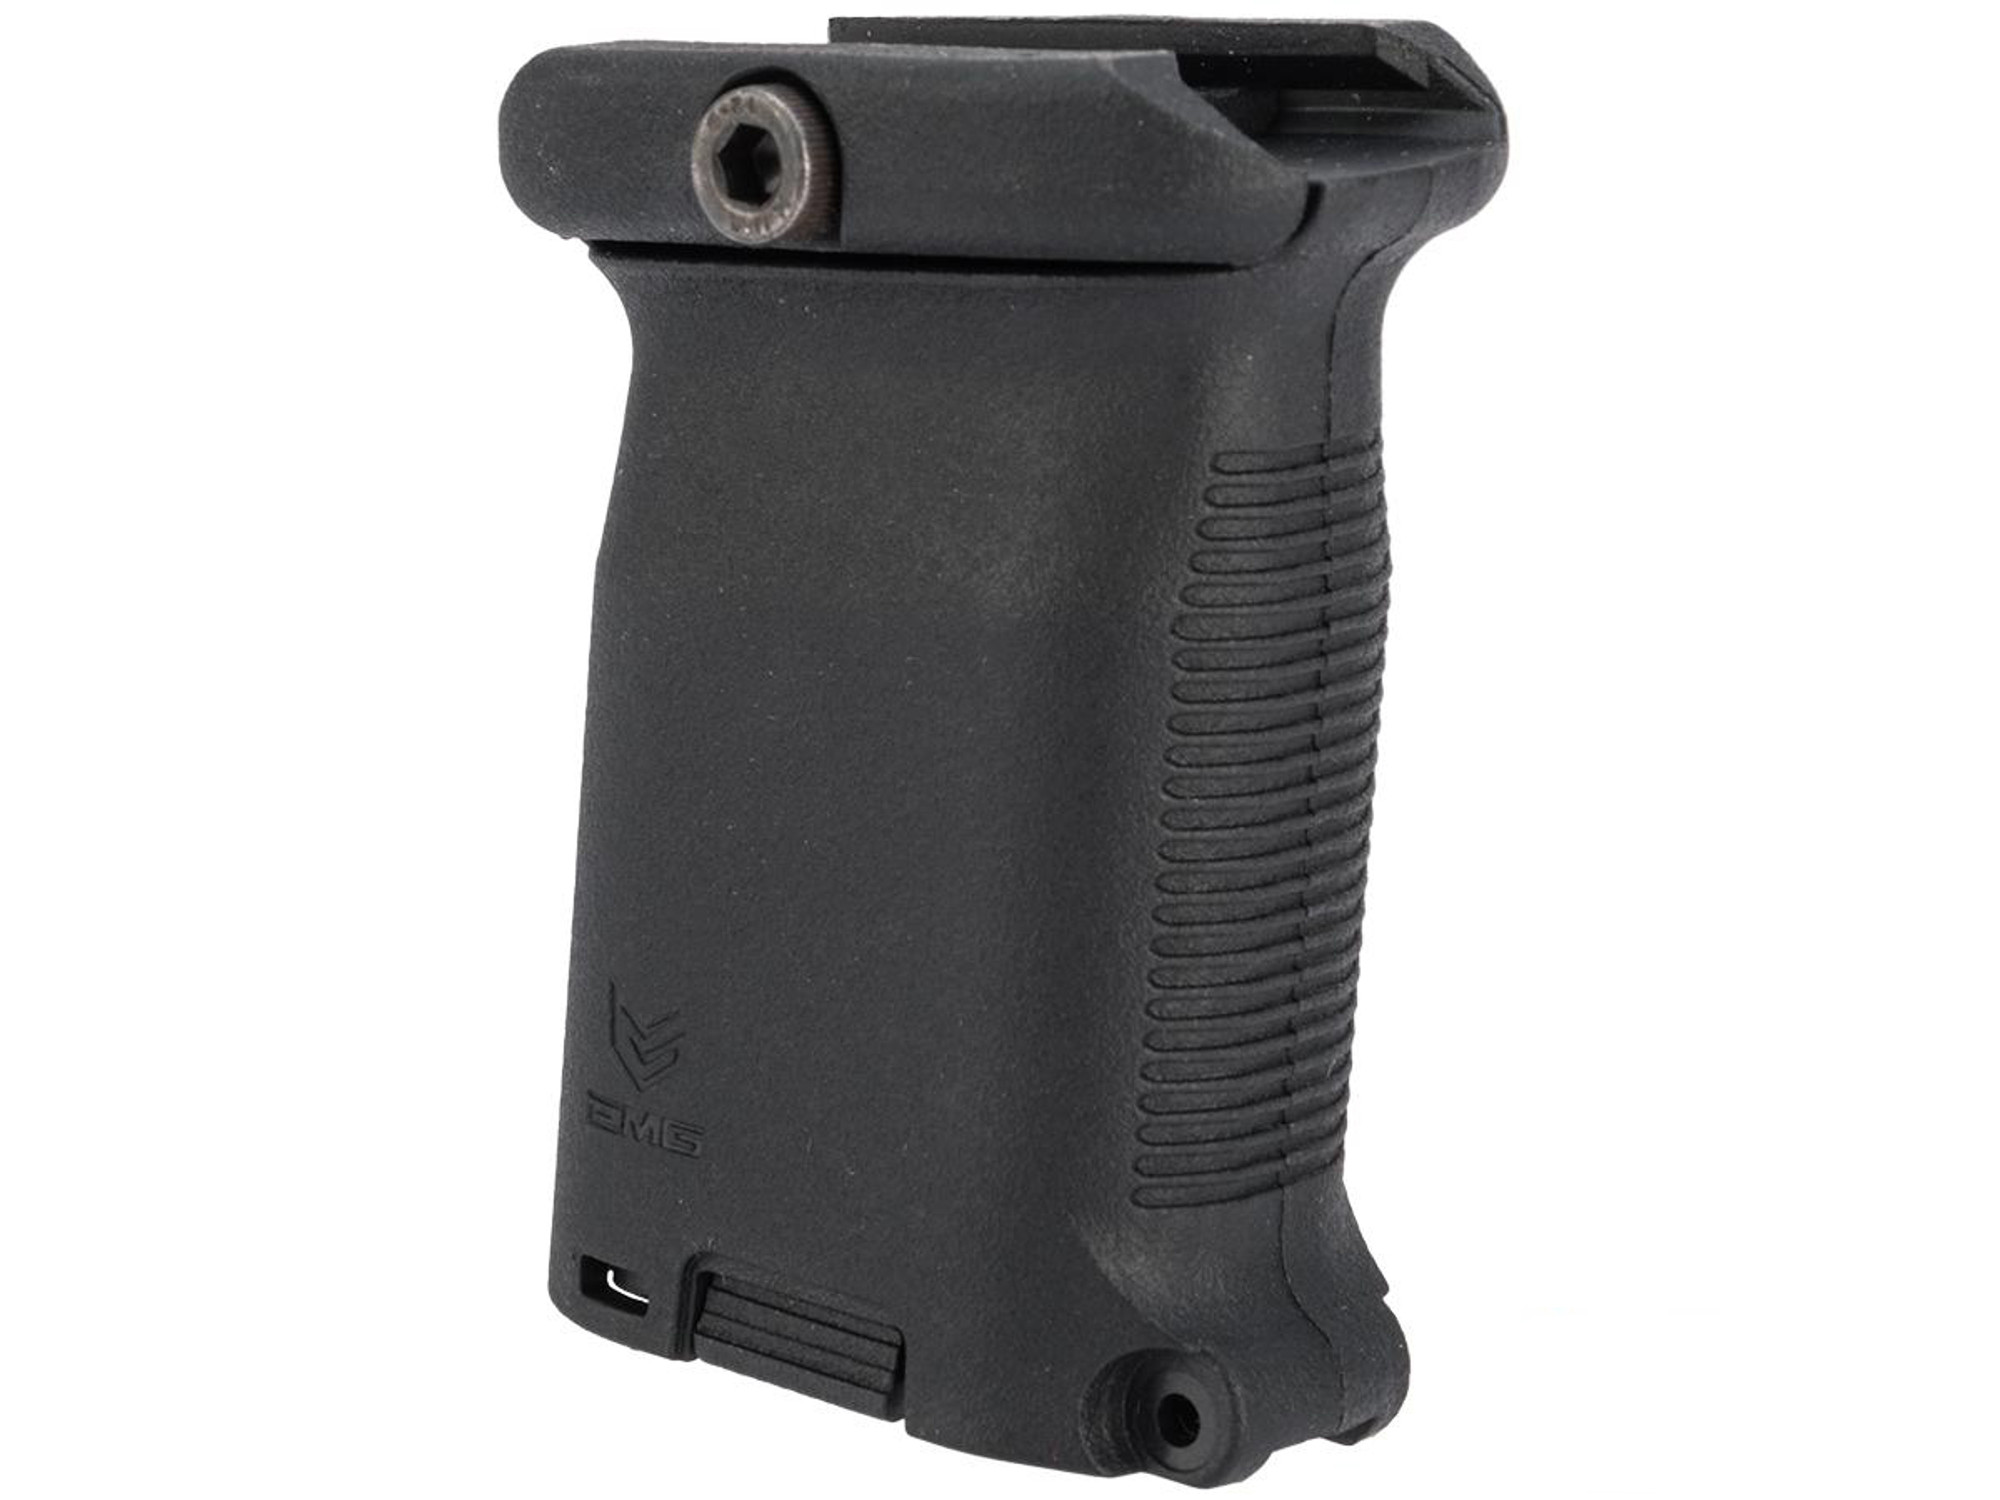 EMG Stubby Storage Compartment Vertical Grip (Picatinny)